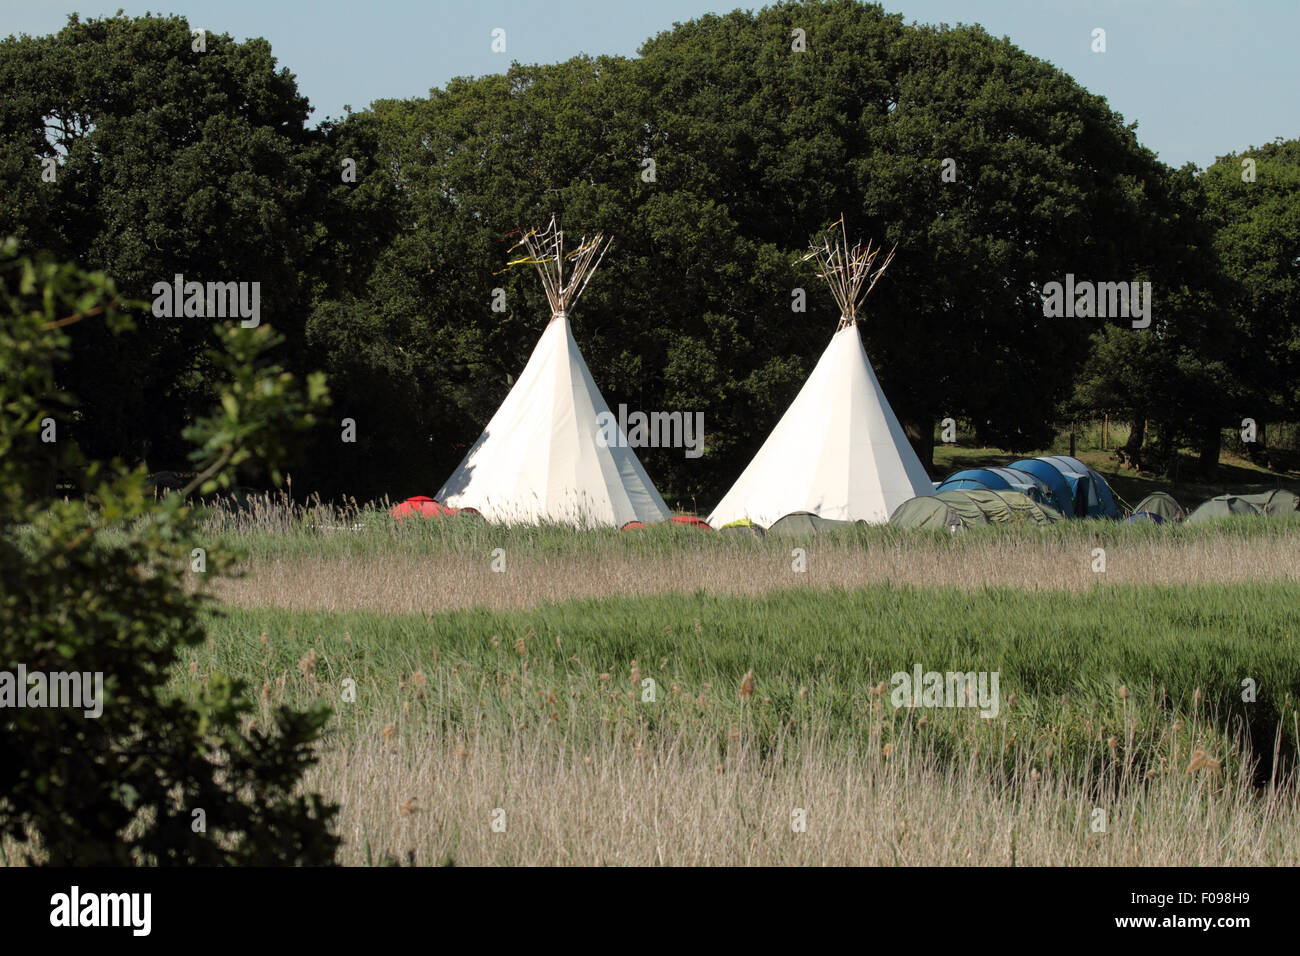 Tipi or Tepee campsite near Chichester Marina in West Sussex, England. Stock Photo